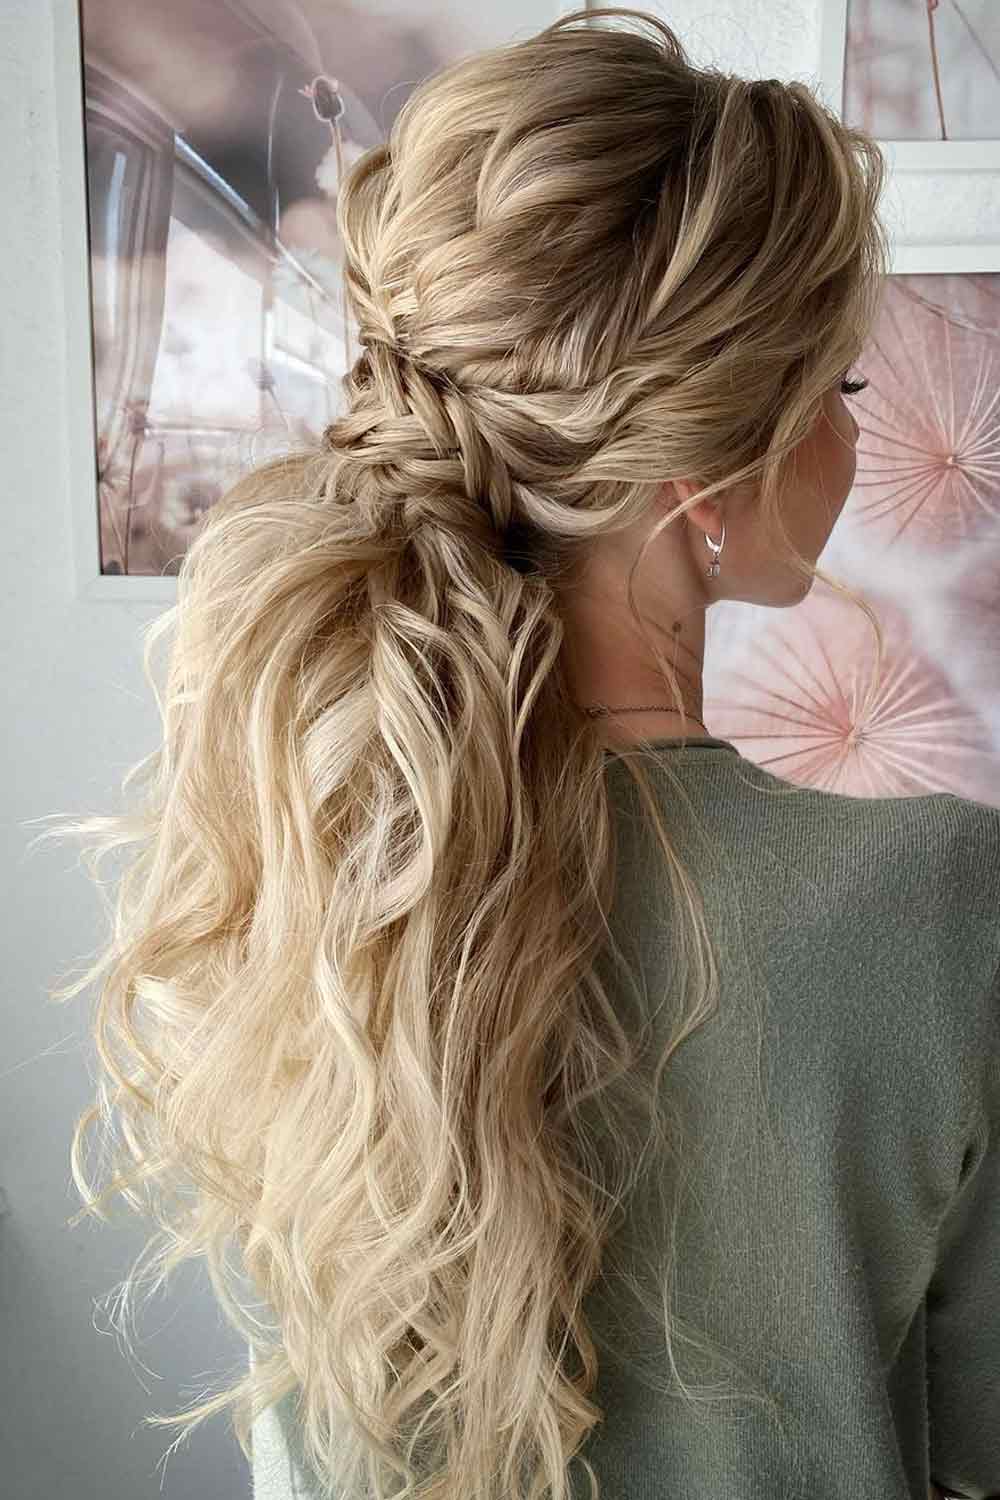 Pin on Cute first day of school hairstyles;)